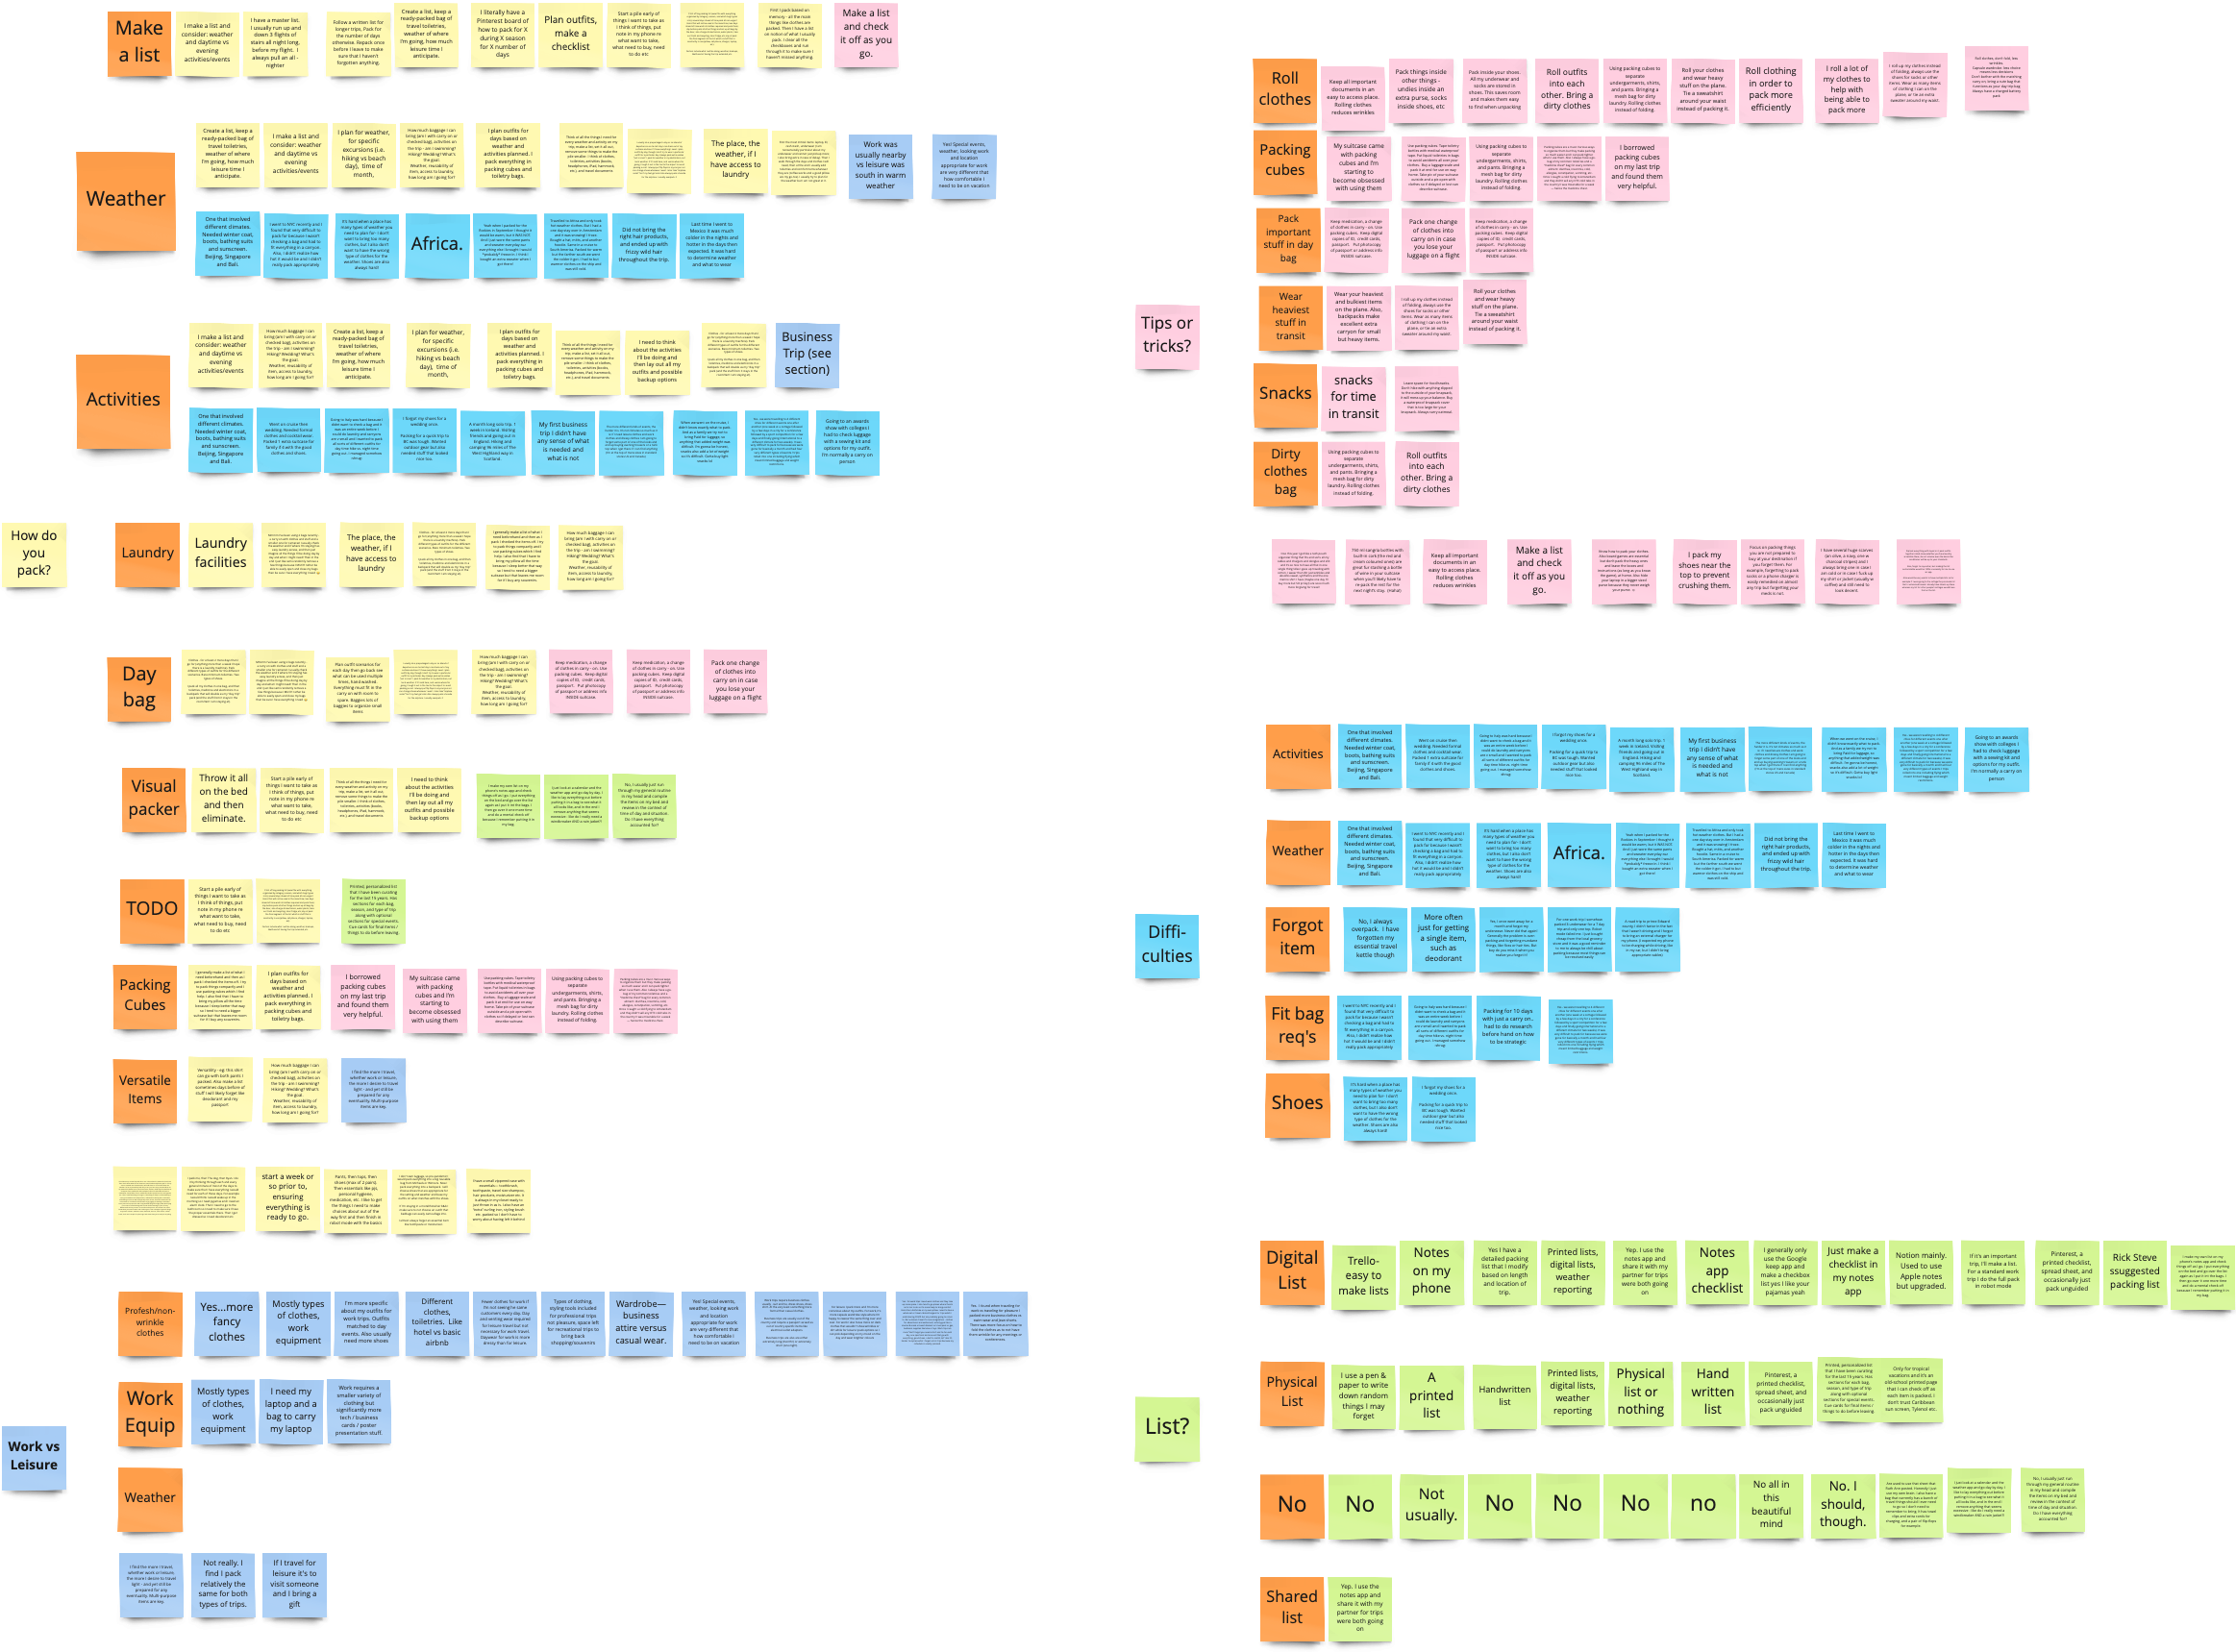 Post its grouped into an affinity map from all the survey results.